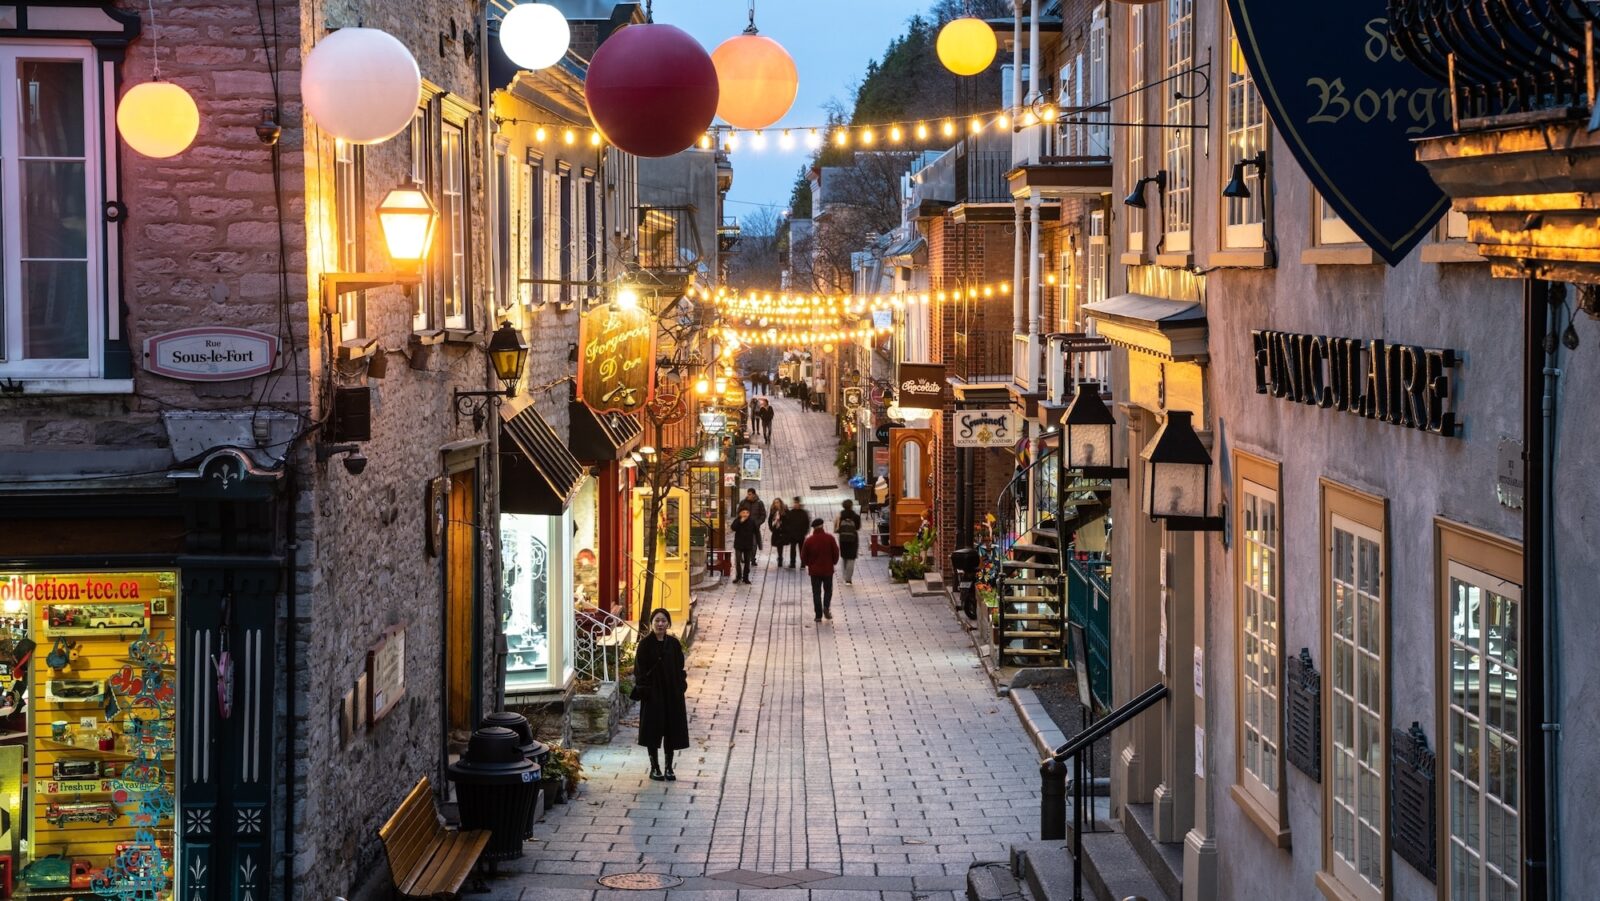 Historic lower Quebec City in Canada in the evening with festive lights and people strolling